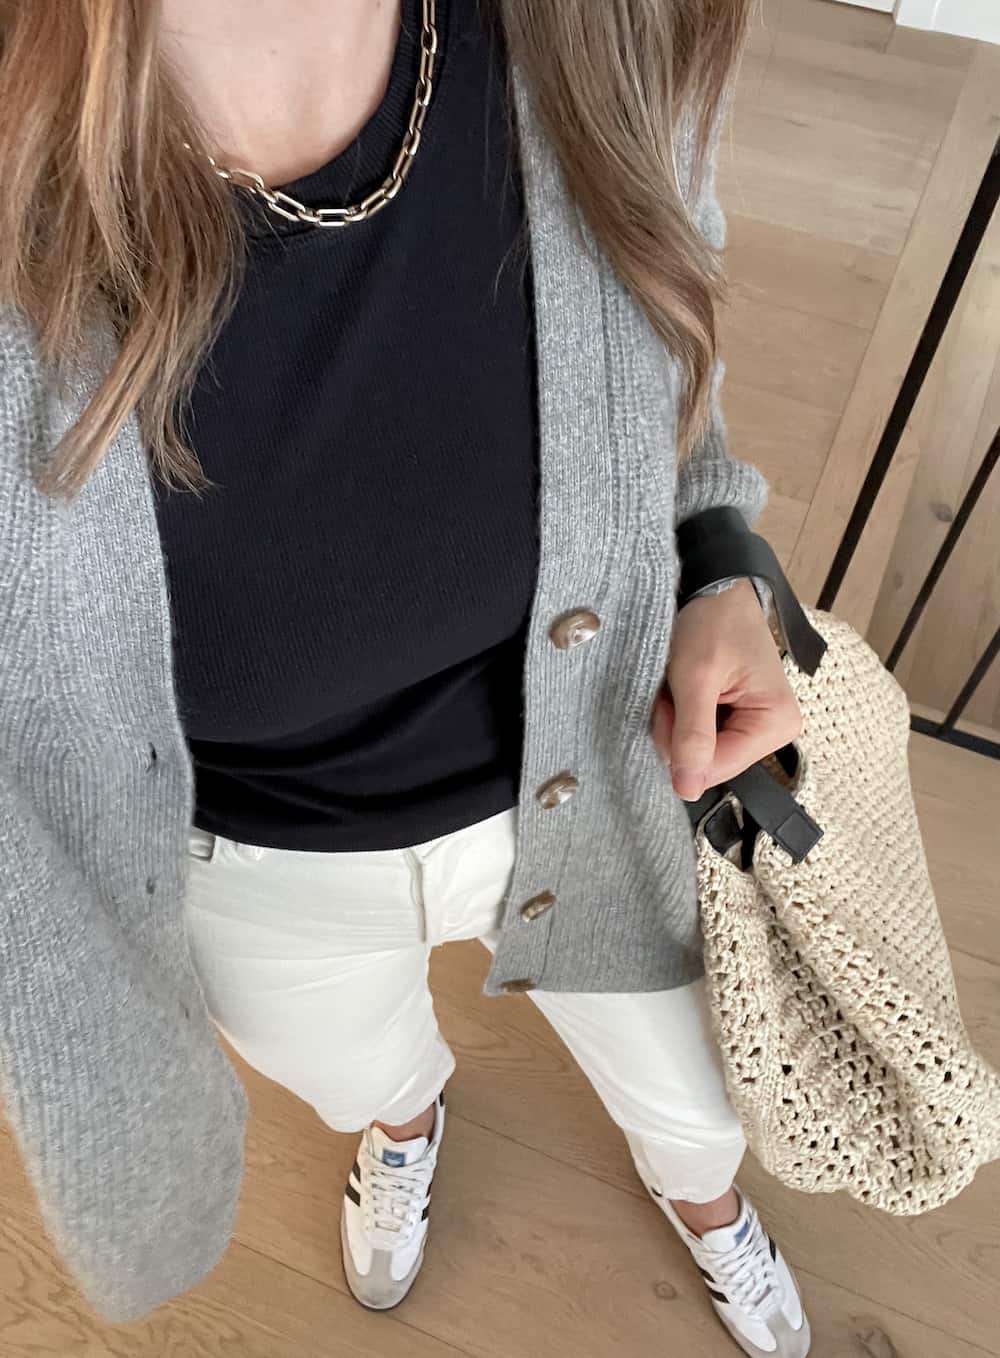 Christal wearing white jeans, sneakers, a black t-shirt and a grey cardigan sweater.